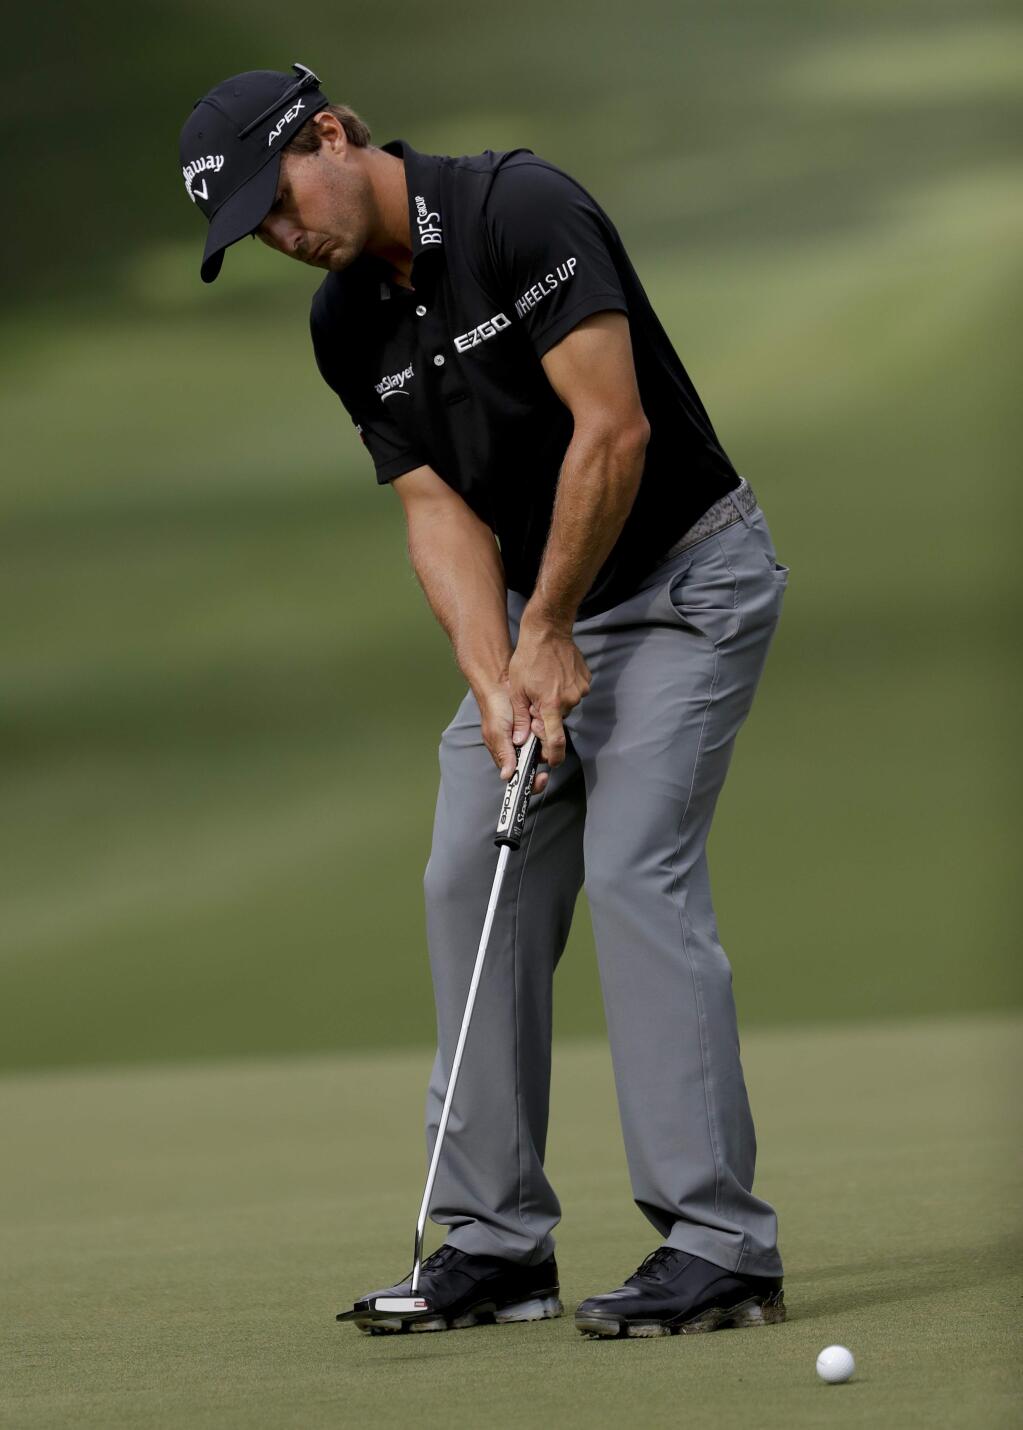 Kevin Kisner putts on the 12th hole during the second round of the PGA Championship golf tournament at the Quail Hollow Club Friday, Aug. 11, 2017, in Charlotte, N.C. (AP Photo/John Bazemore)